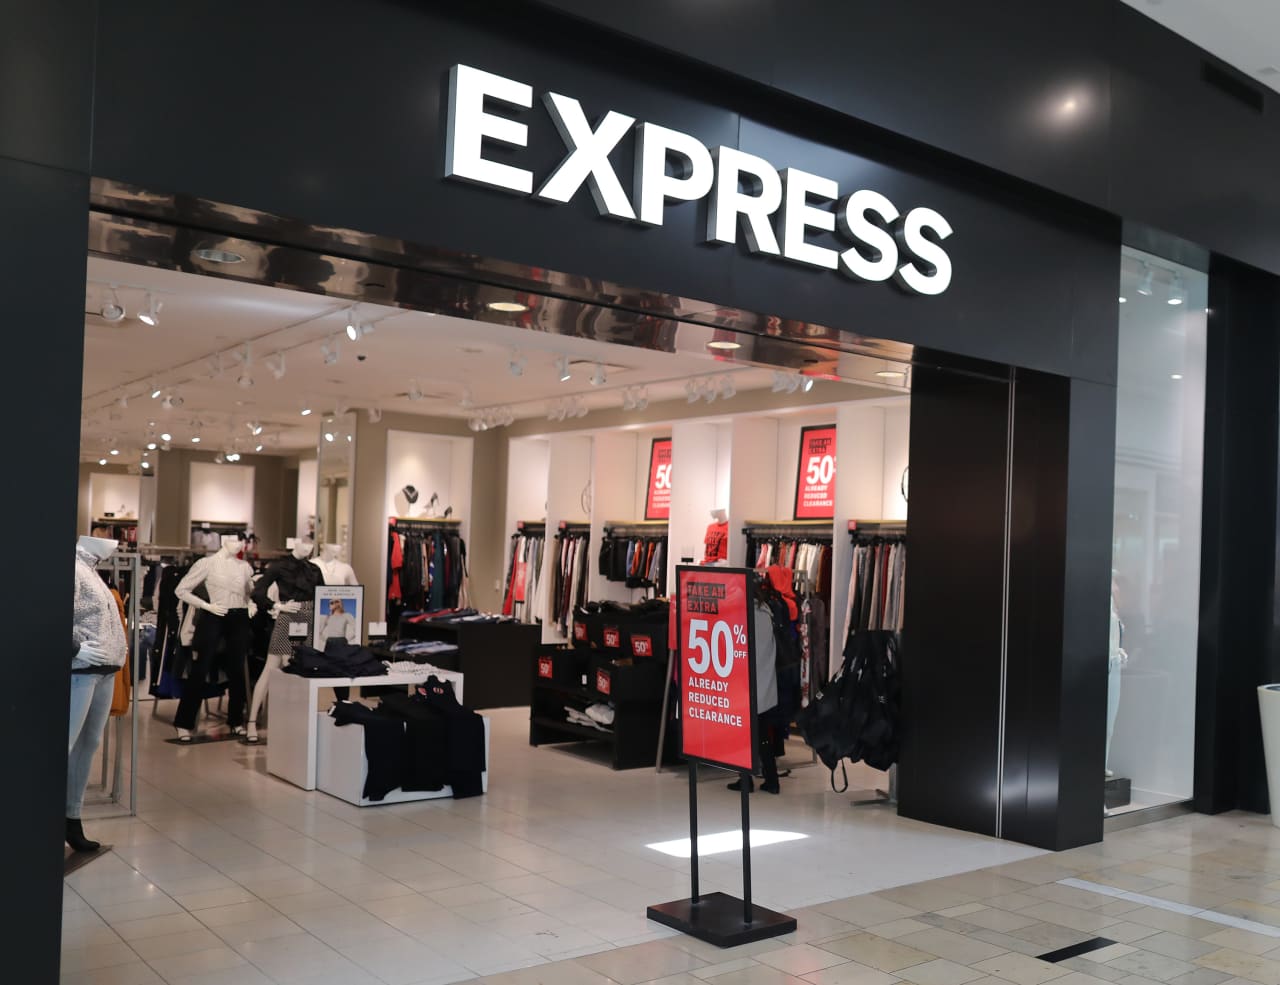 Here’s a list of the 95 Express stores that will be closing